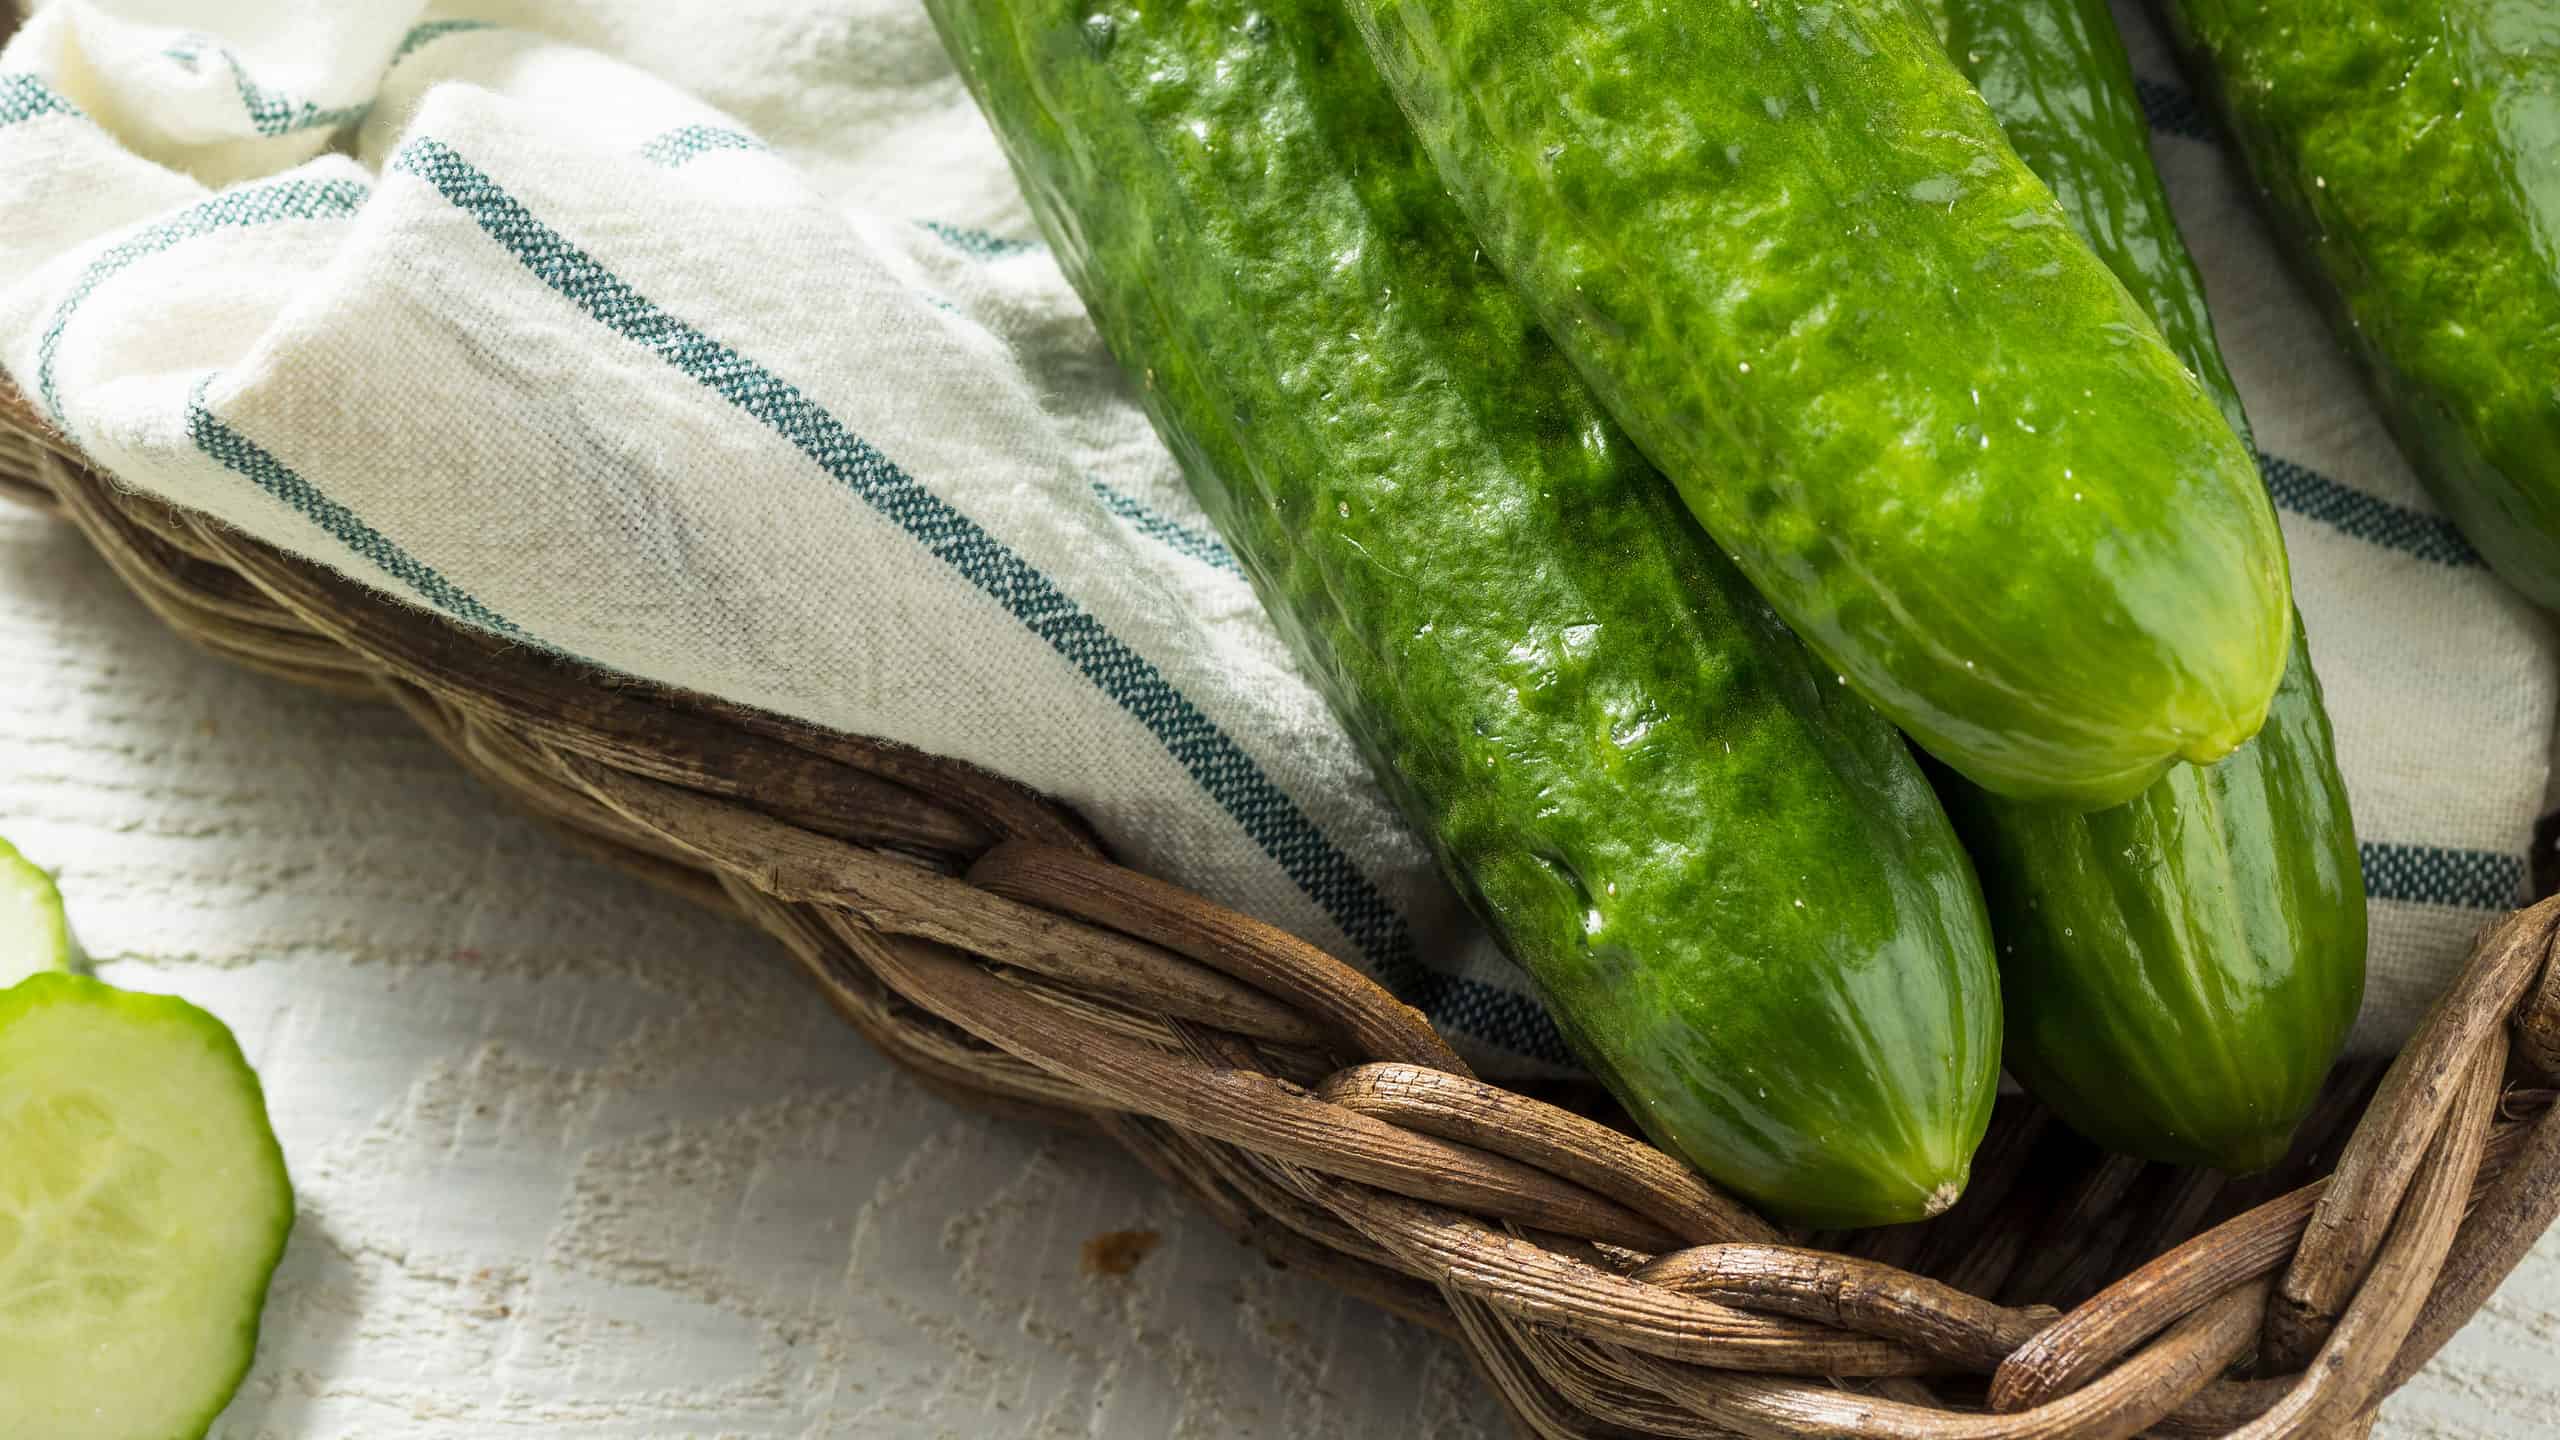 Here's The Difference Between Persian Cucumbers And English Cucumbers